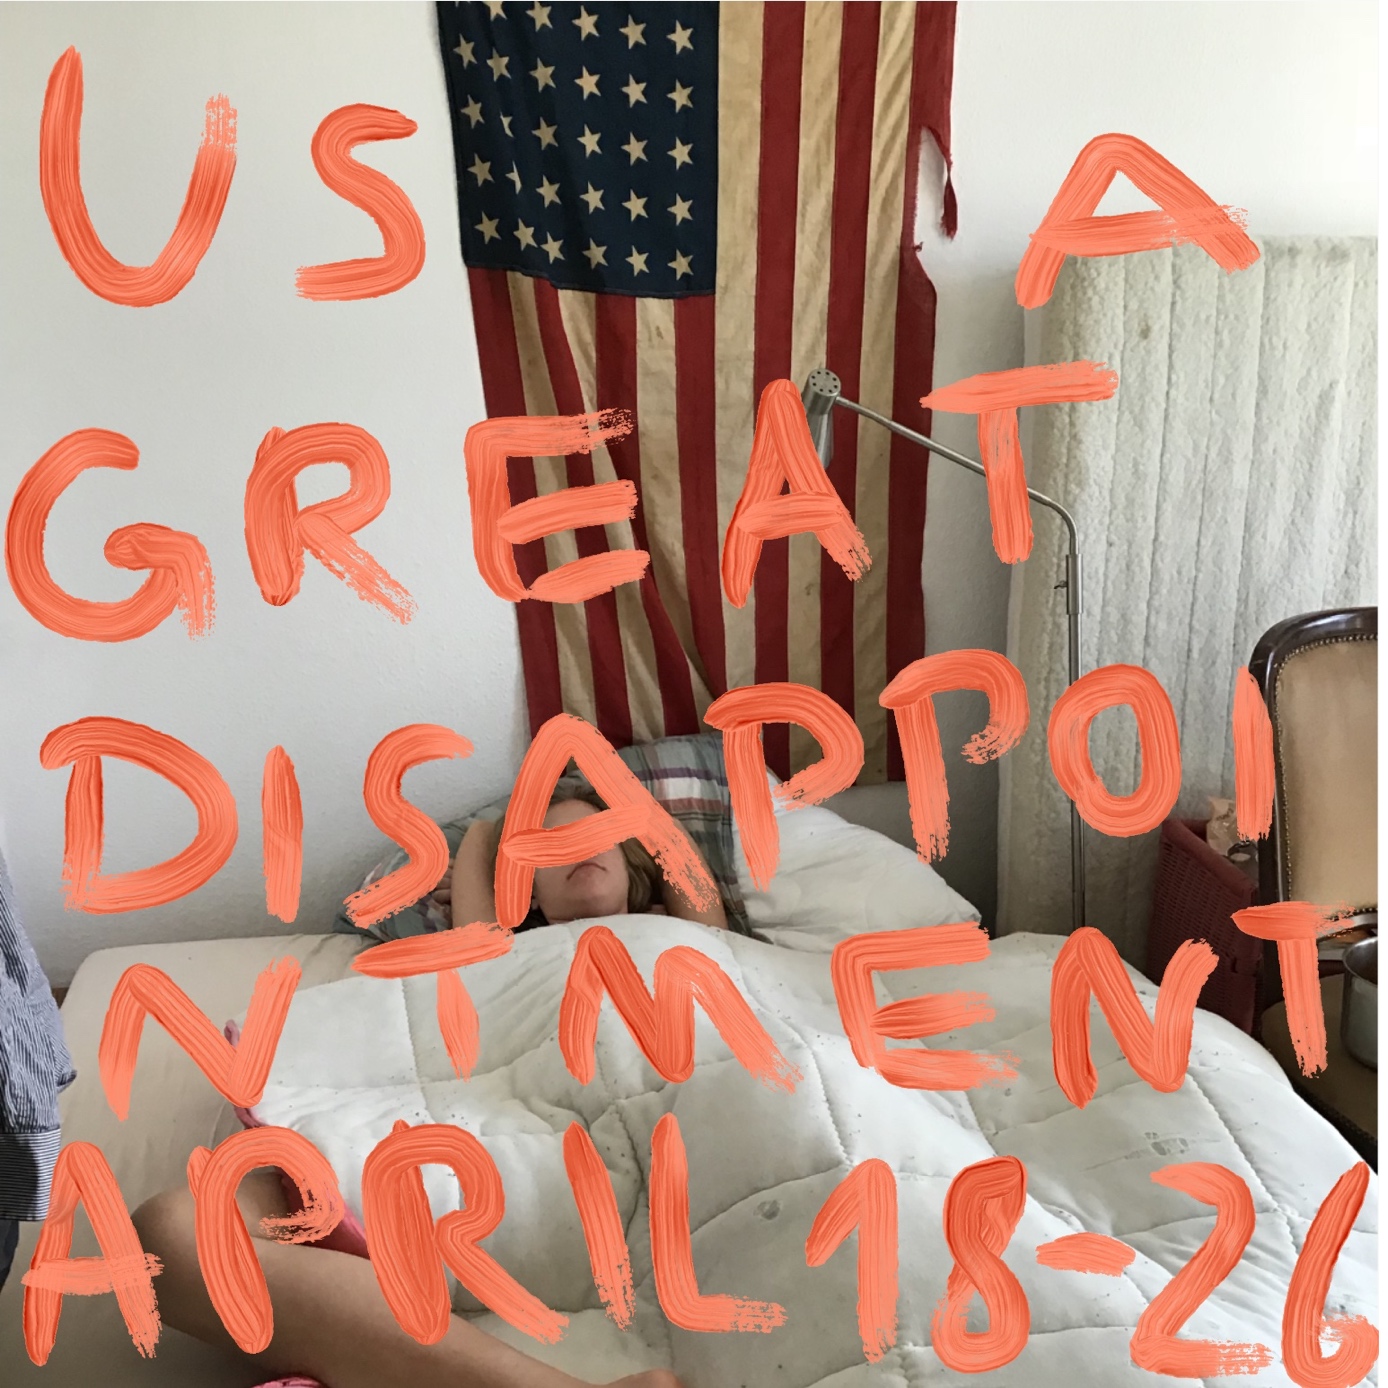 xpon-art “us a great disappointment”